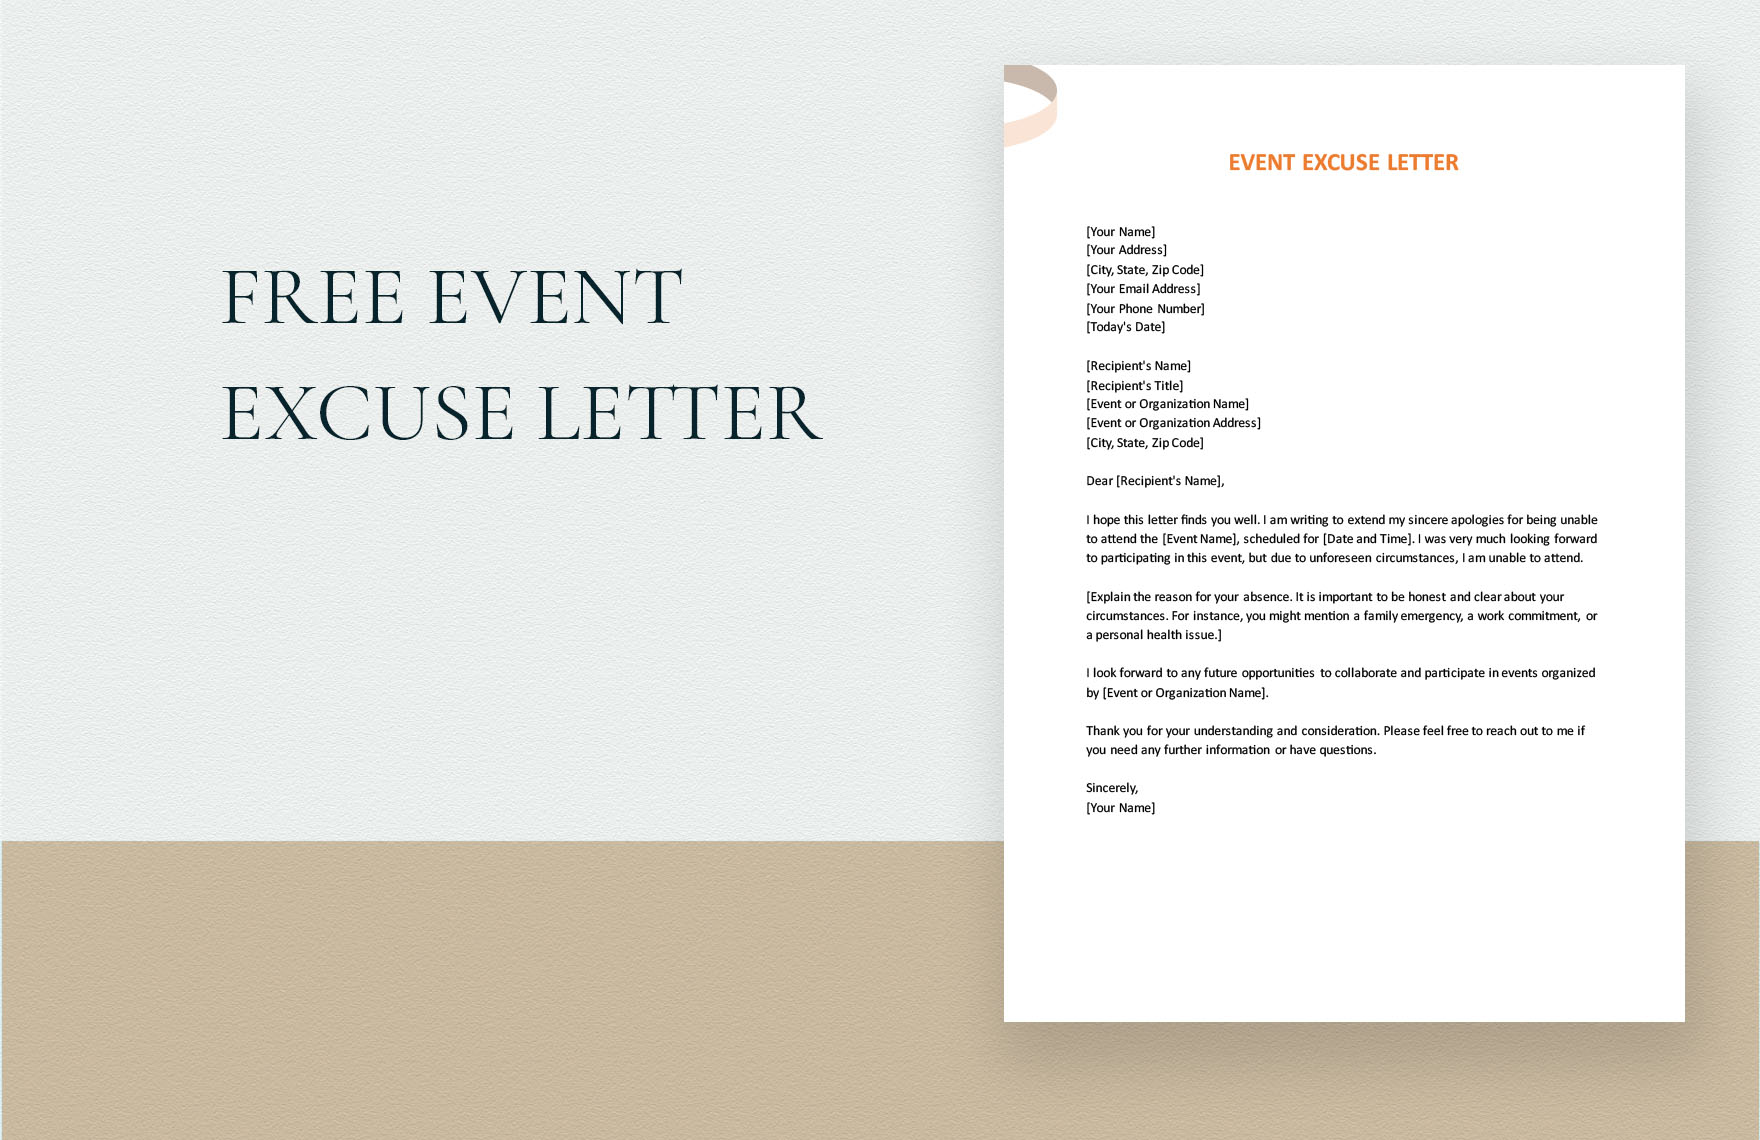 Event Excuse Letter